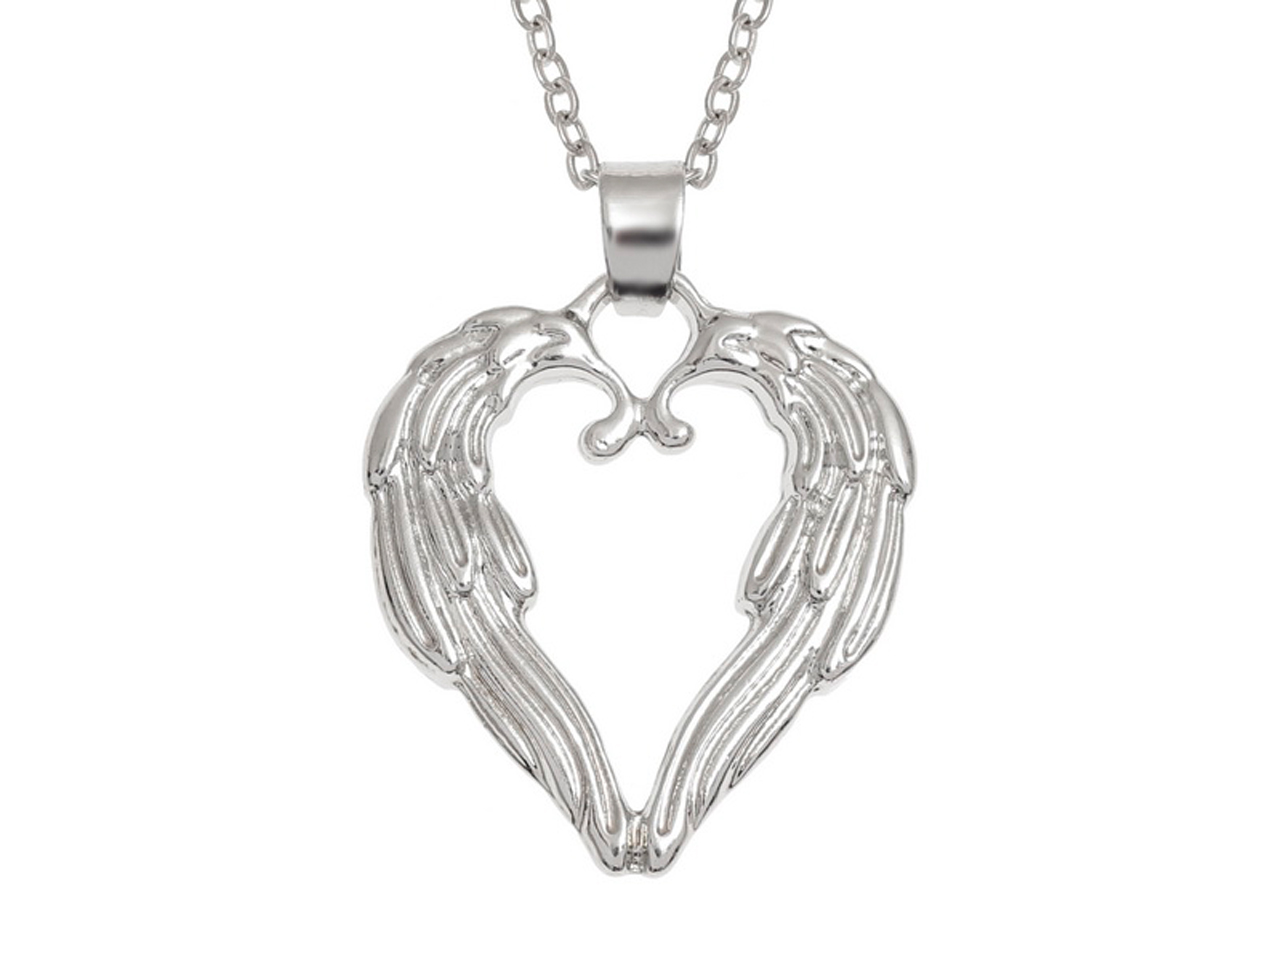 Talbot Fashions Open Heart Necklace Silver Colour Stunning Pendant and 18 Chain Comes in Wish Jewellery Presentation Box